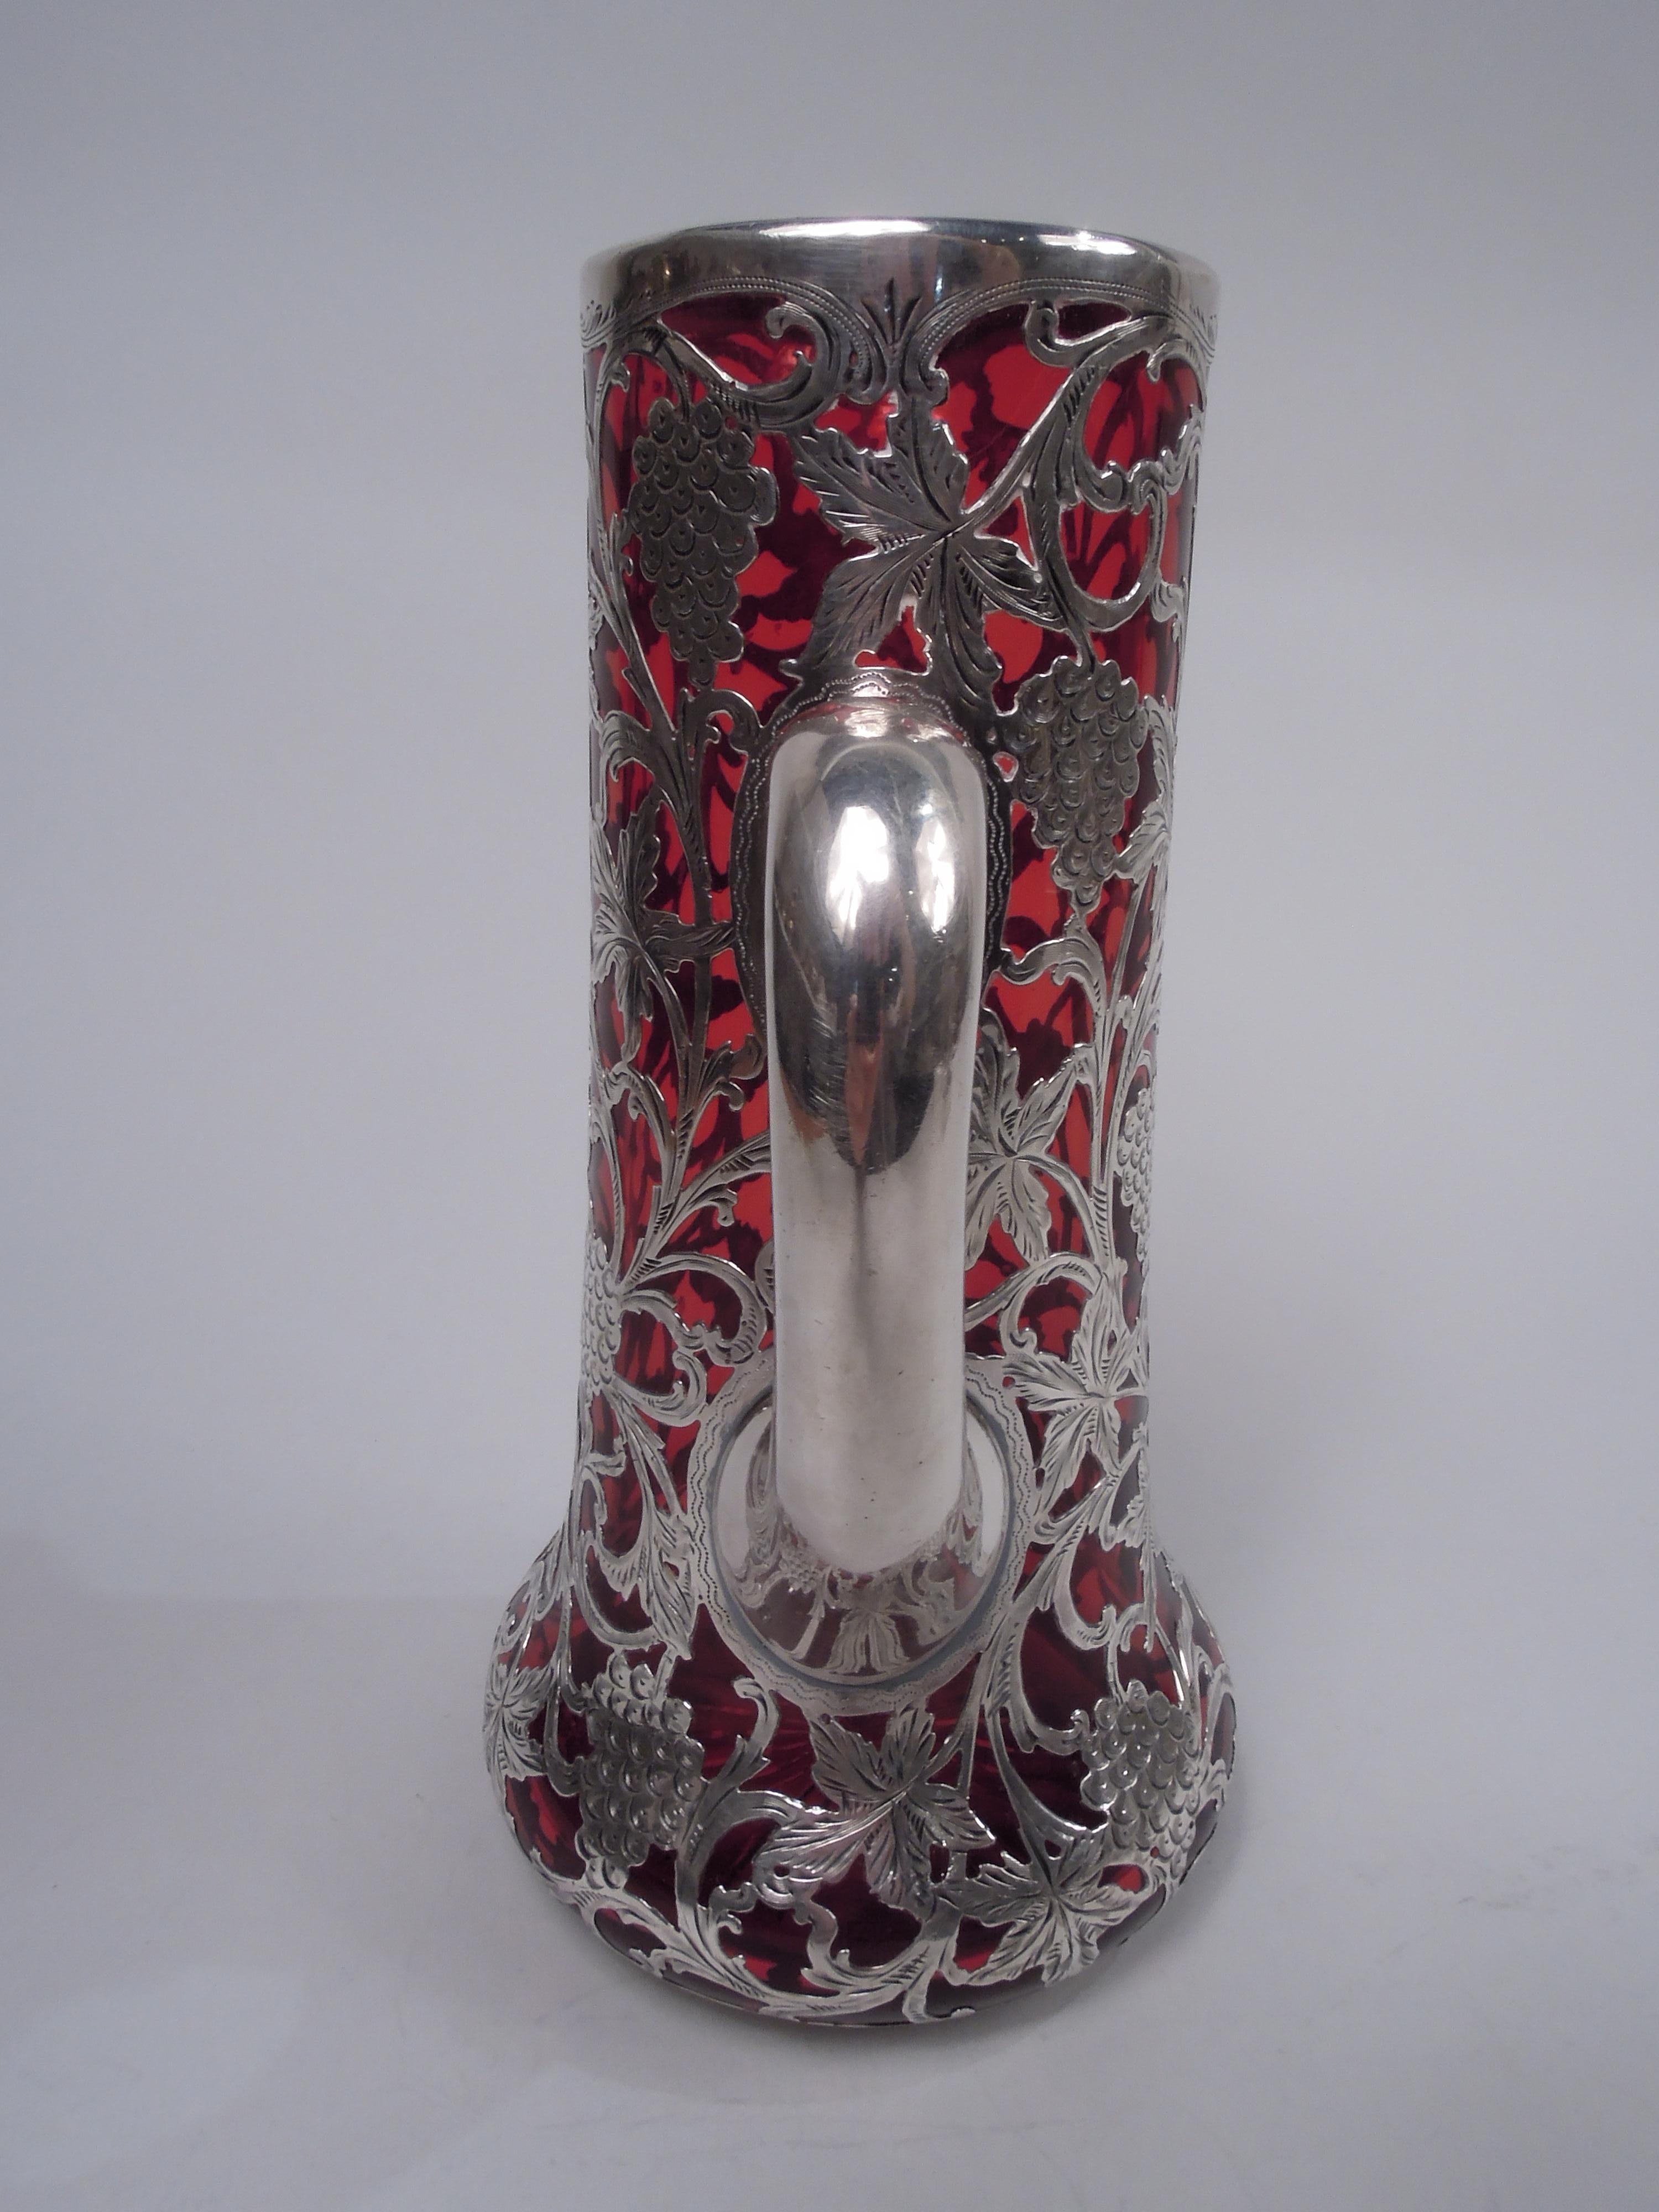 20th Century Alvin American Art Nouveau Red Silver Overlay Claret Jug For Sale